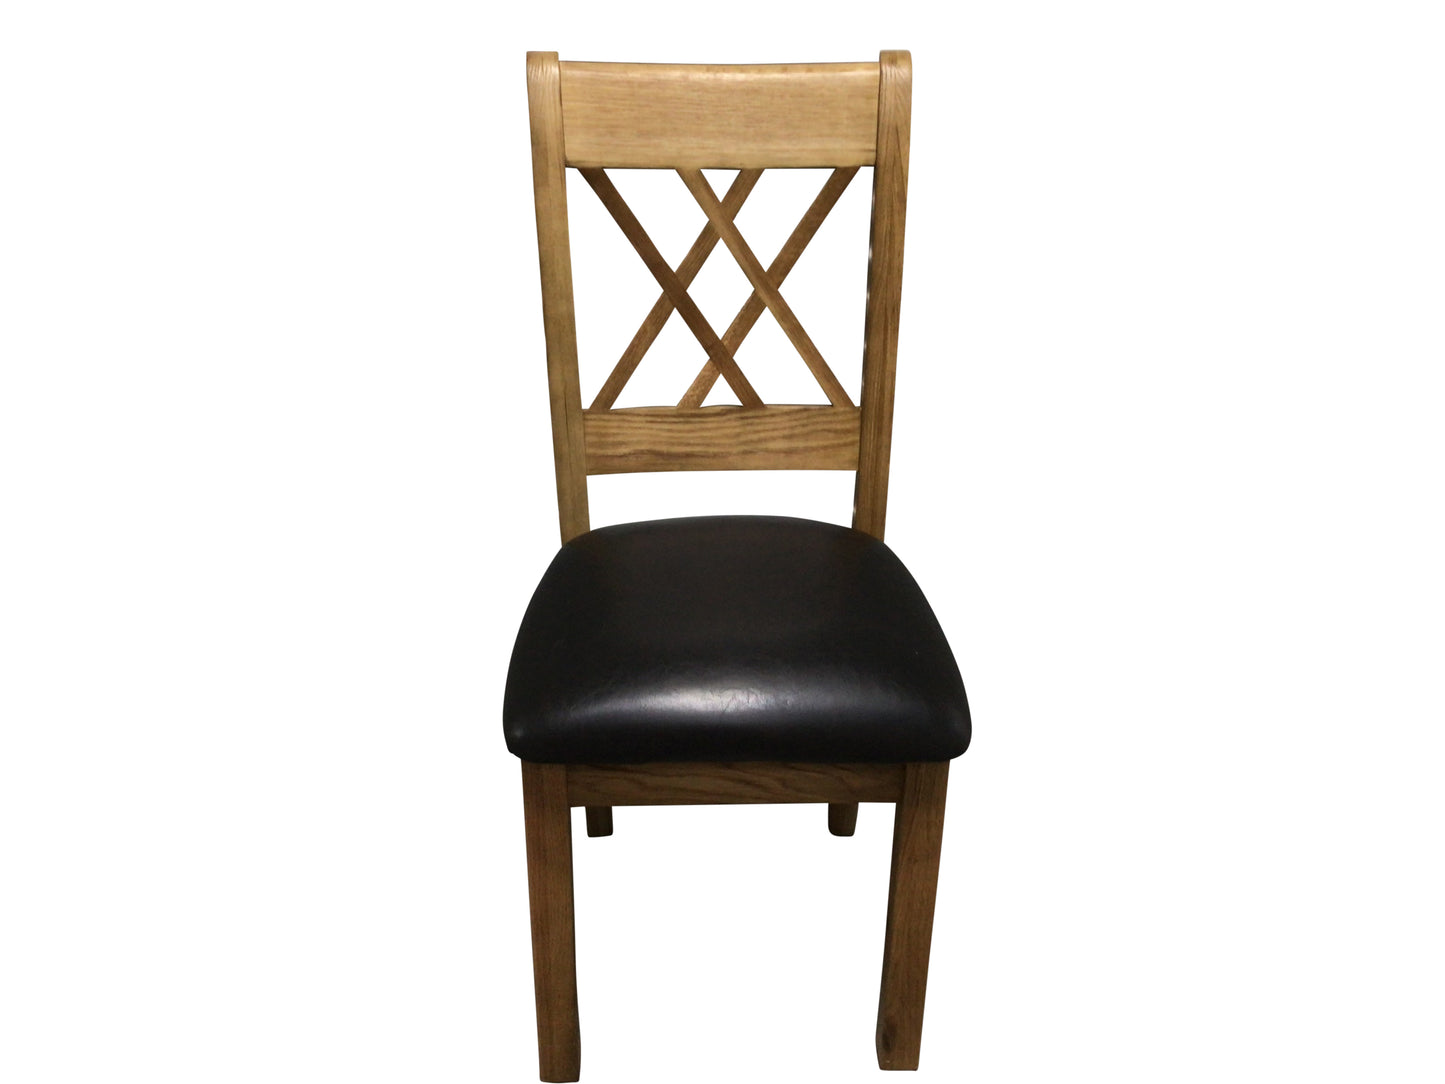 Cologne Oak Chair with padded seat